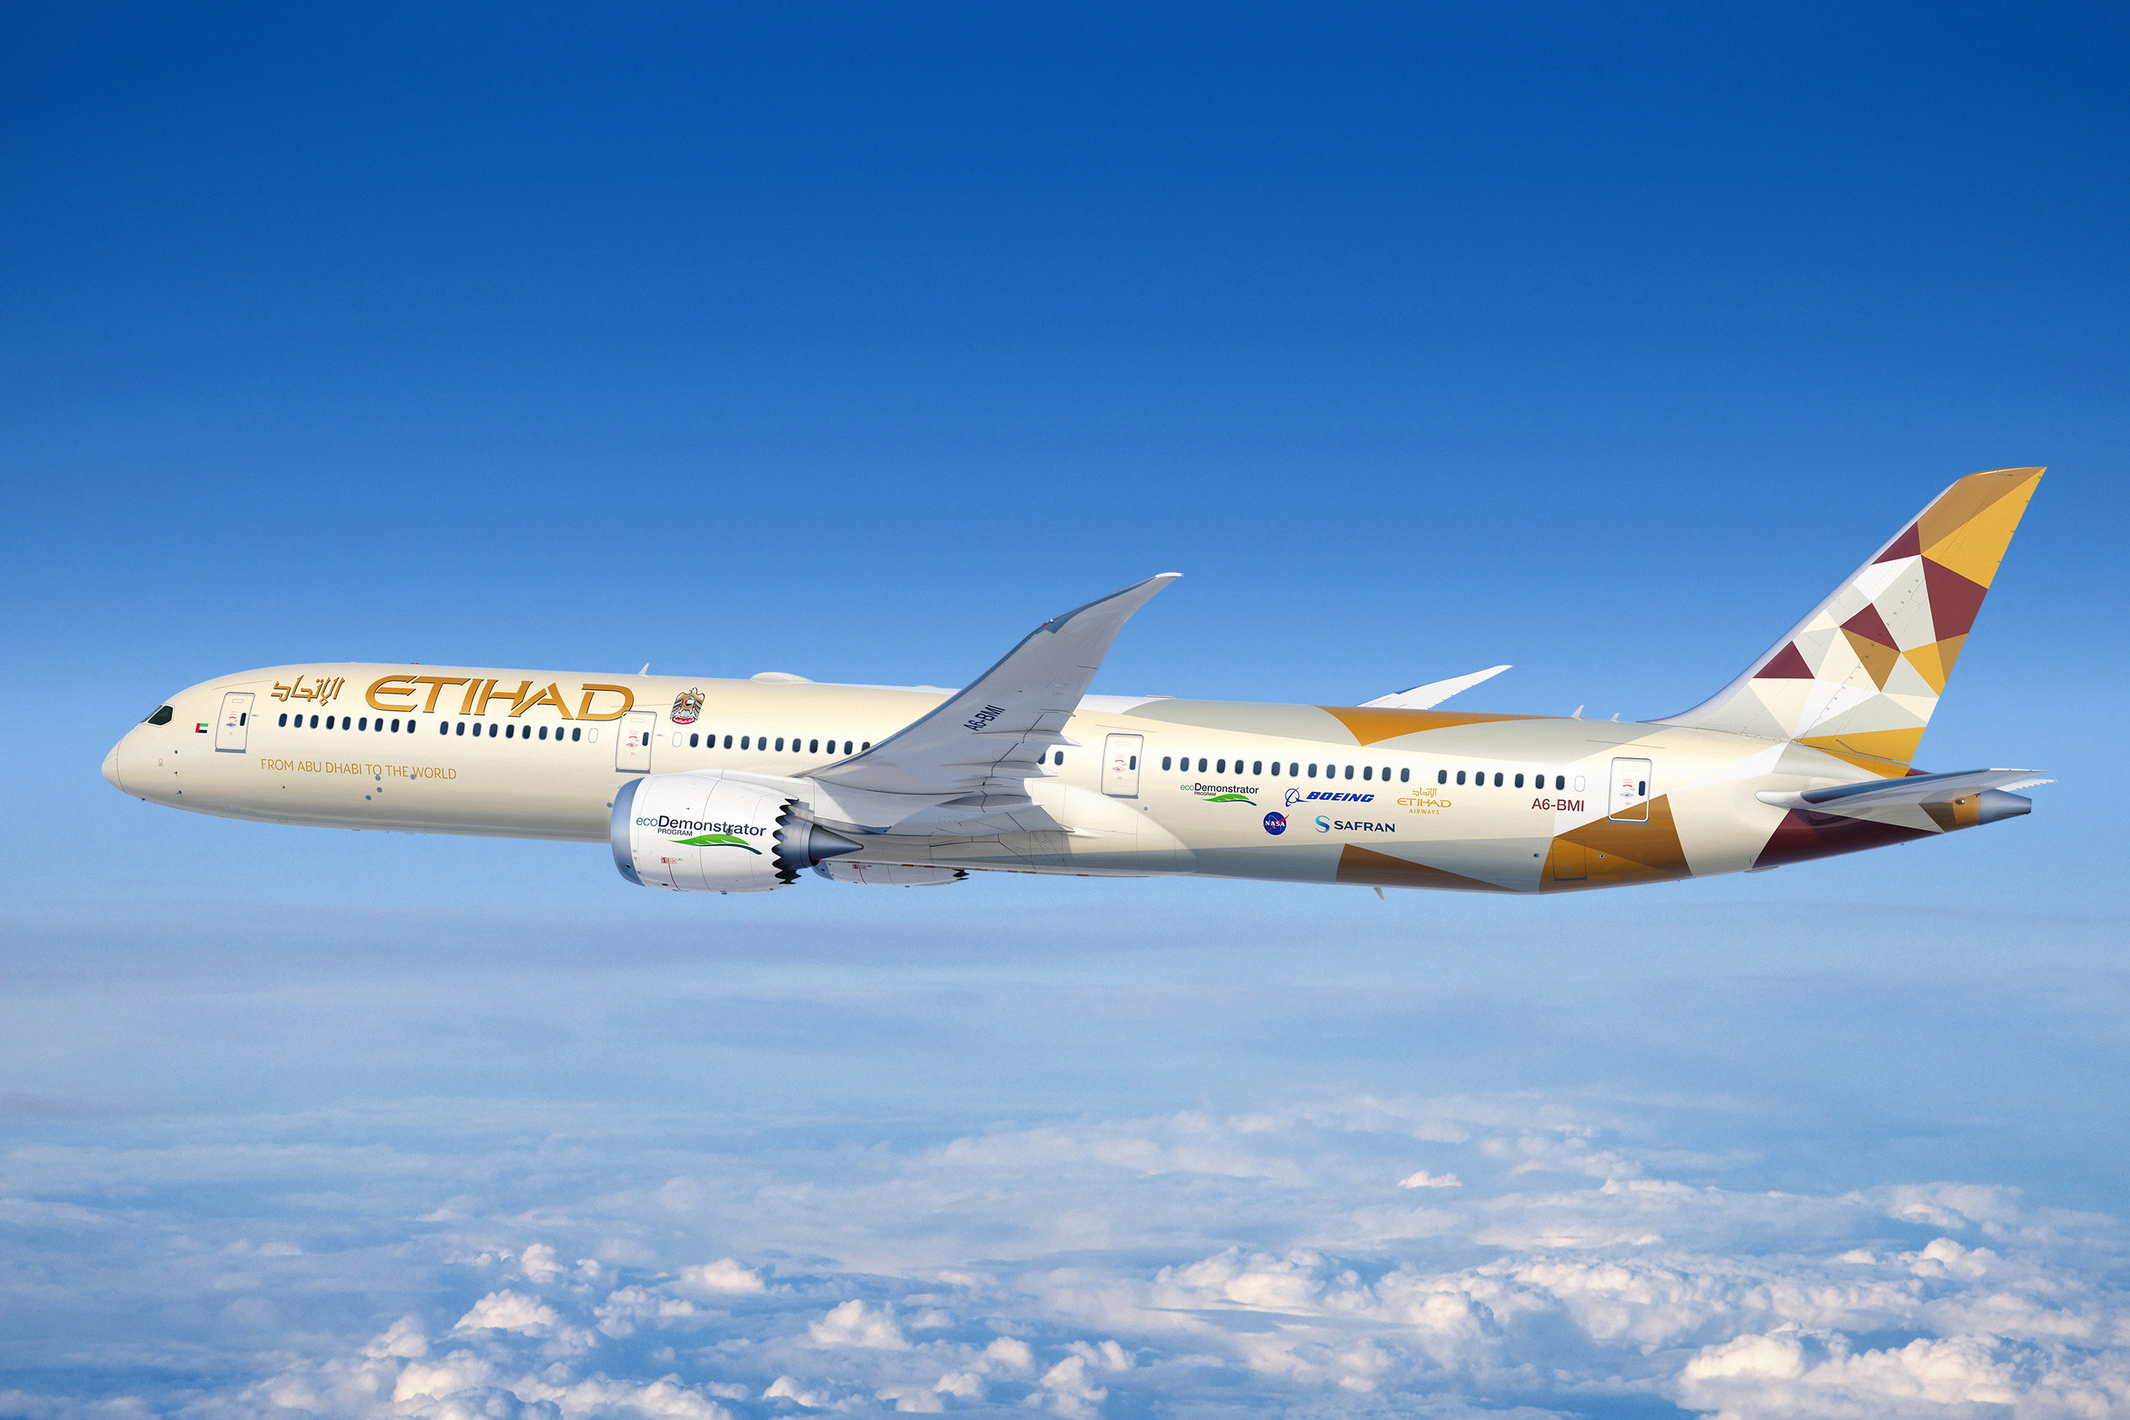 Boeing and Etihad Airways will use a 787-10 Dreamliner to test ways to reduce emissions and noise as part of the aerospace company's ecoDemonstrator program before the airline accepts delivery of the airplane this fall. The collaboration, which includes extensive sound measurement testing with industry partners, builds on a strategic sustainability alliance Boeing and Etihad formed in November 2019. Click to enlarge.